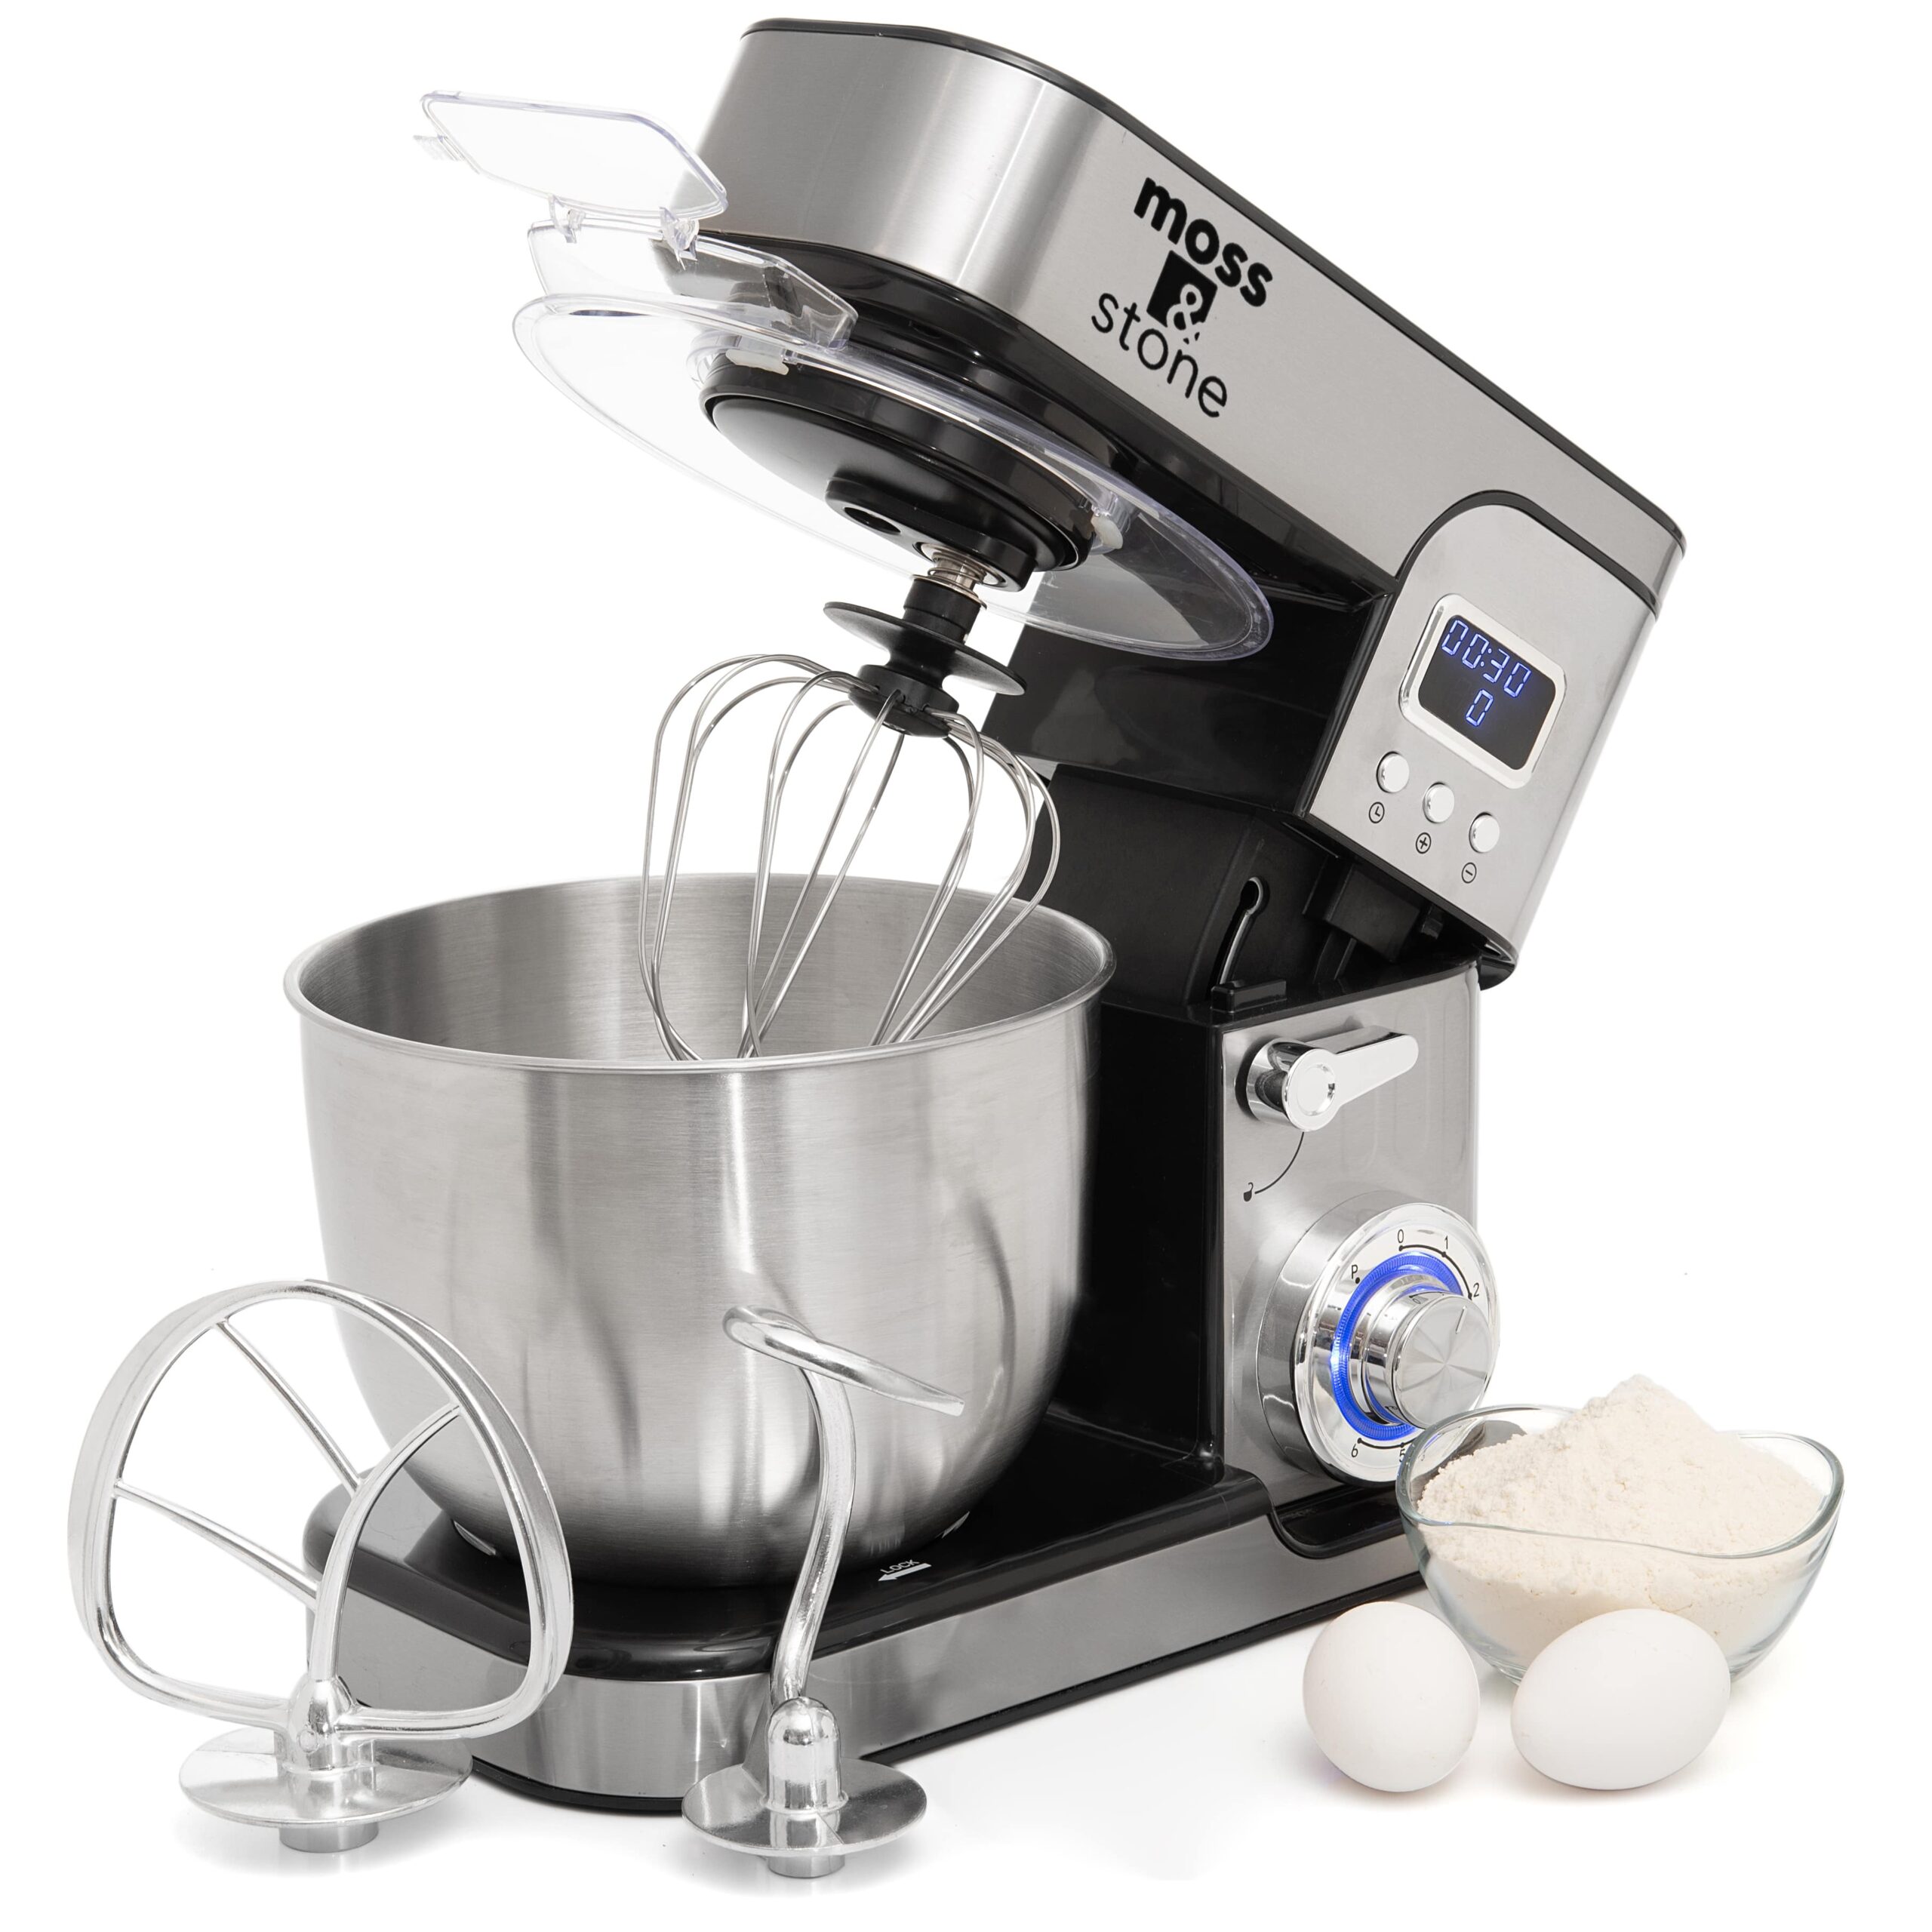 Moss & Stone Stand Mixer With LCD Display, 6 Speed Electric Mixer